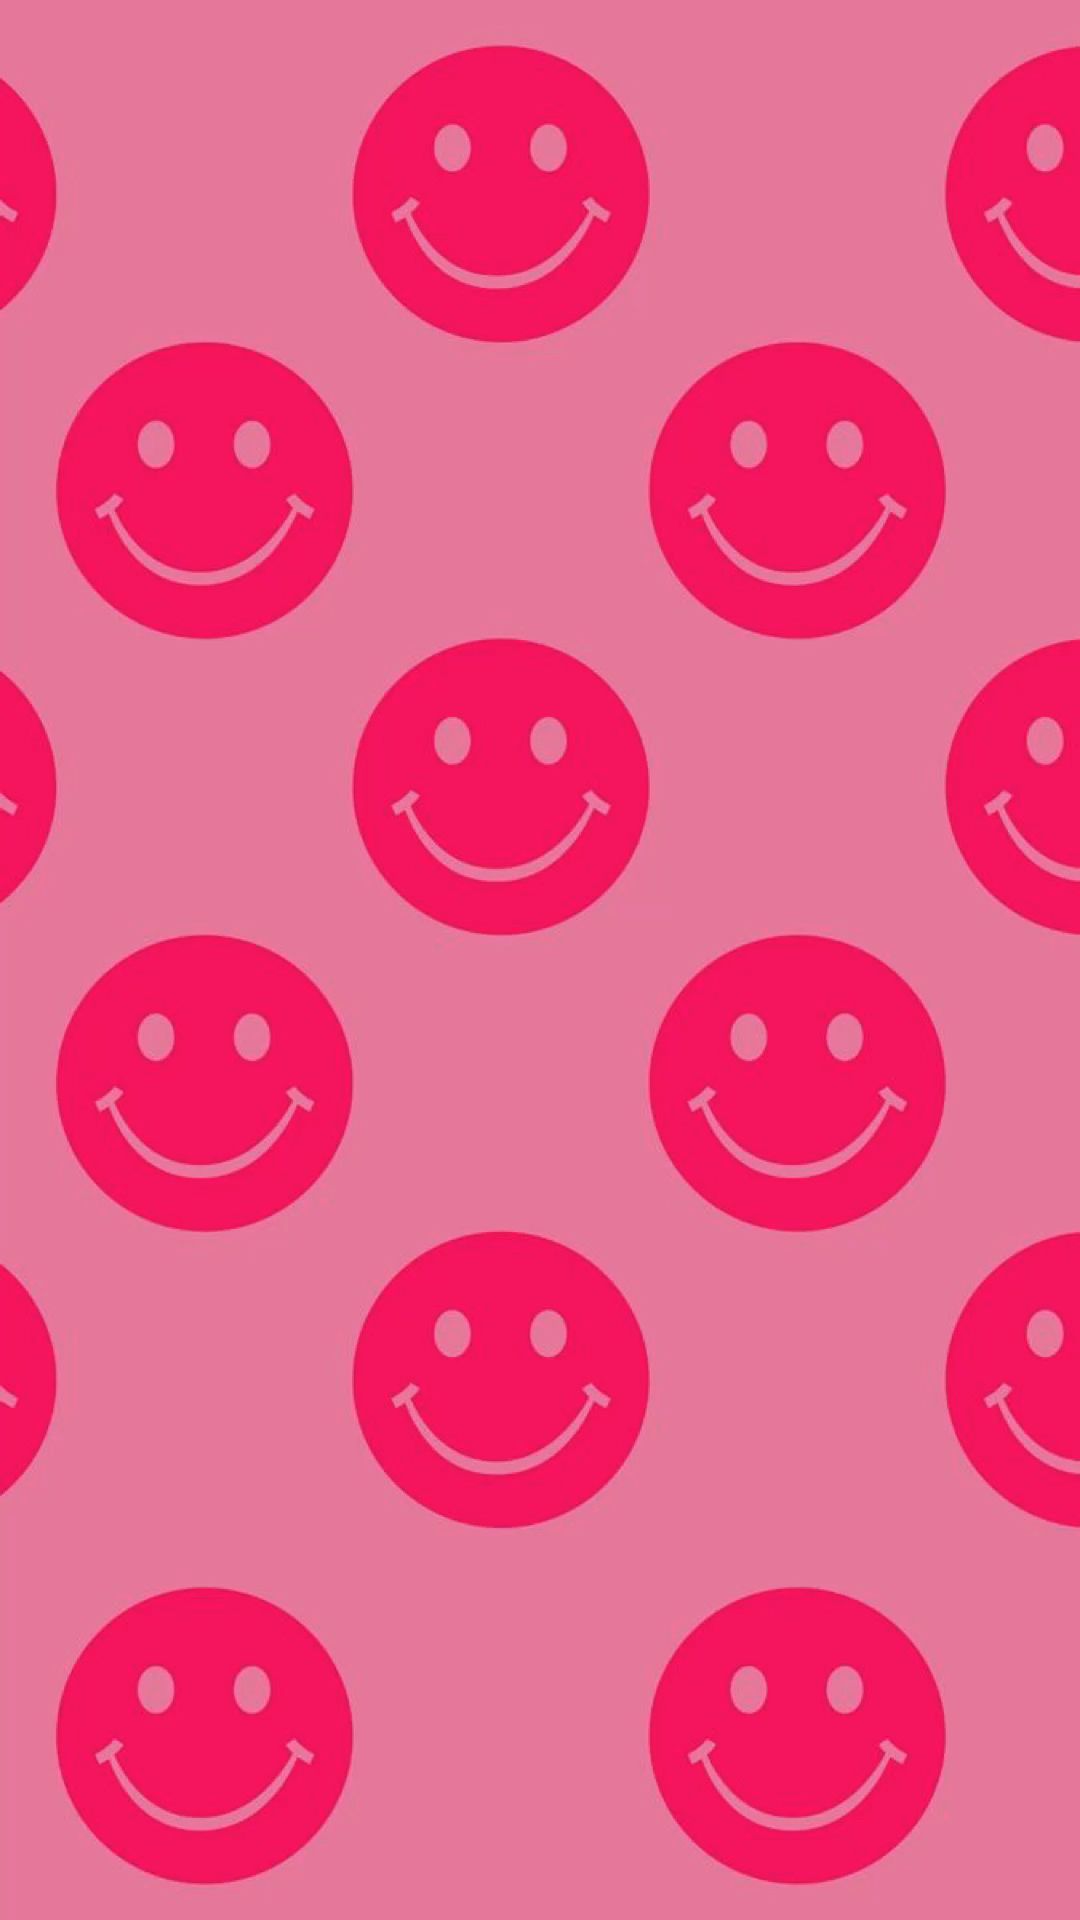 smiley faces :). Preppy wallpaper, iPhone wallpaper pattern, Simple iphone wallpaper